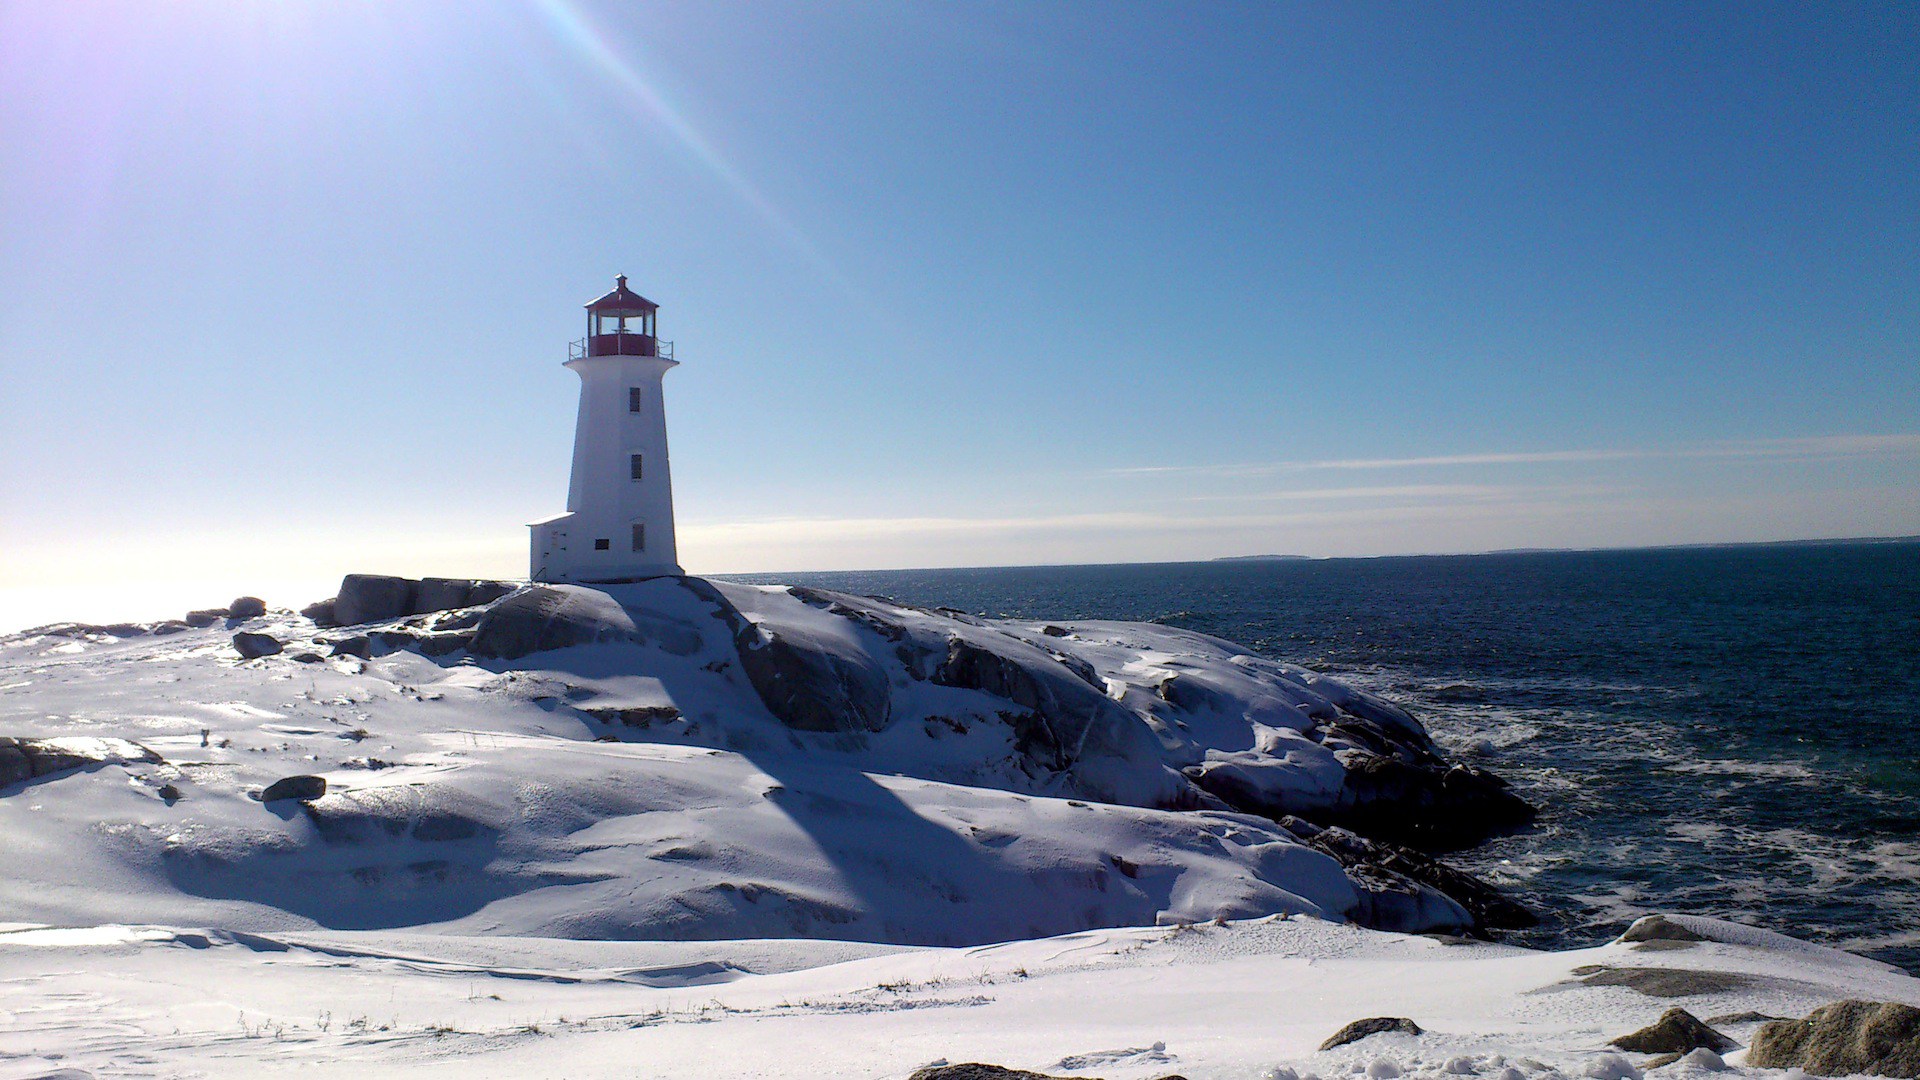 Winter time on the sea lighthouse in the sun